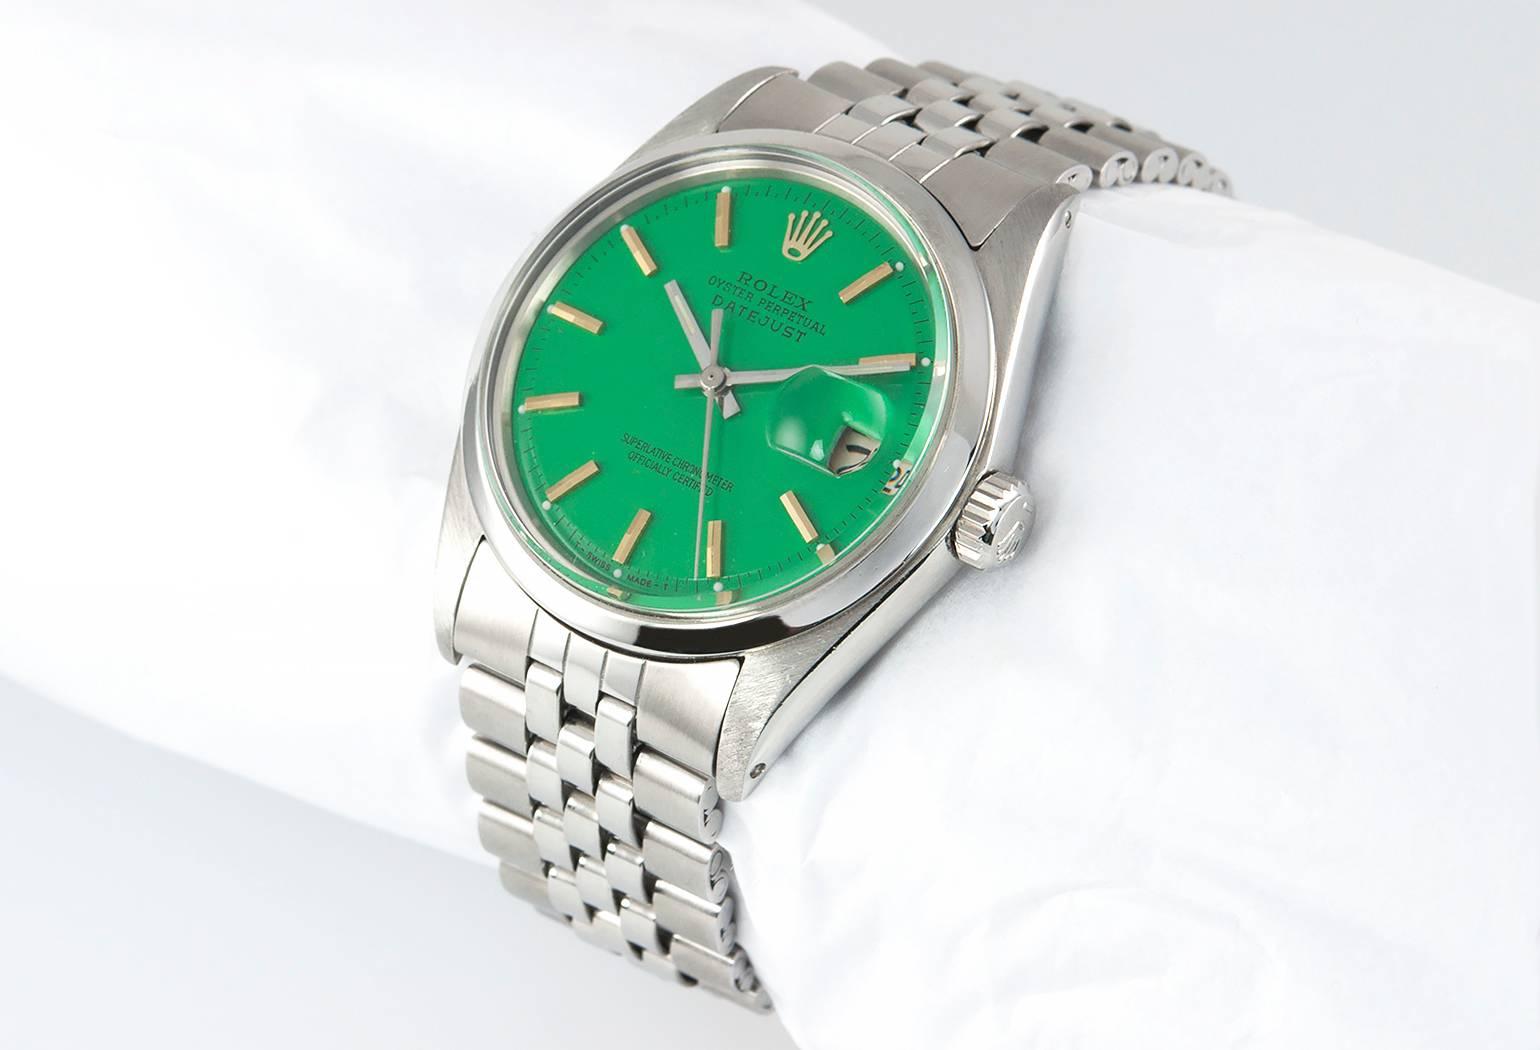 Rolex DateJust steel wristwatch, reference 1600. This classic Rolex watch features a custom green dial, a plastic crystal, stainless steel waterproof crown, smooth stainless steel bezel, with an old style jubilee bracelet. Circa 1967. The case width